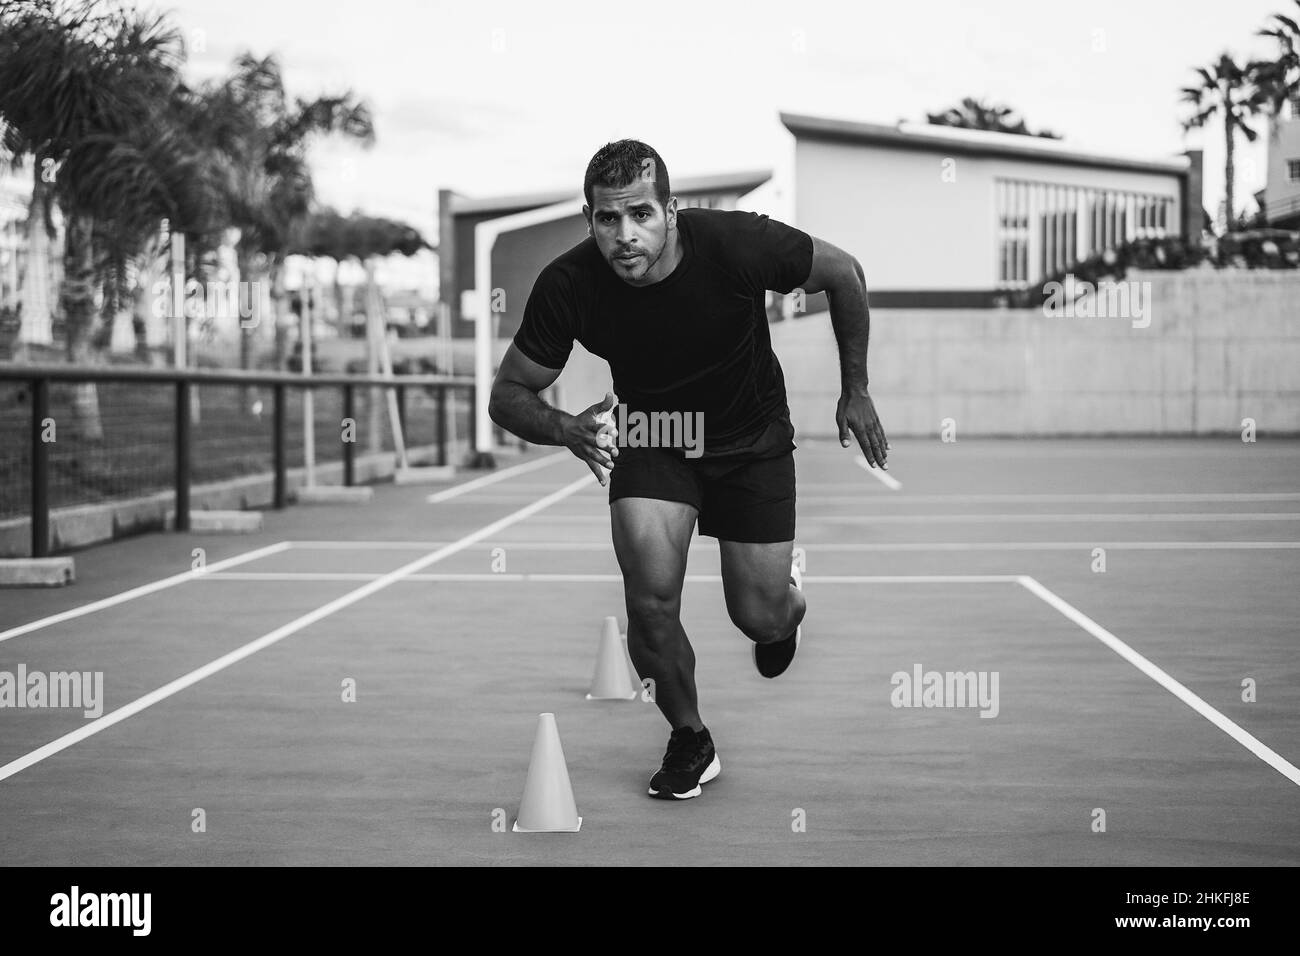 Hispanic man doing speed and agility cone drills workout session outdoors - Focus on man face - Black and white edition Stock Photo